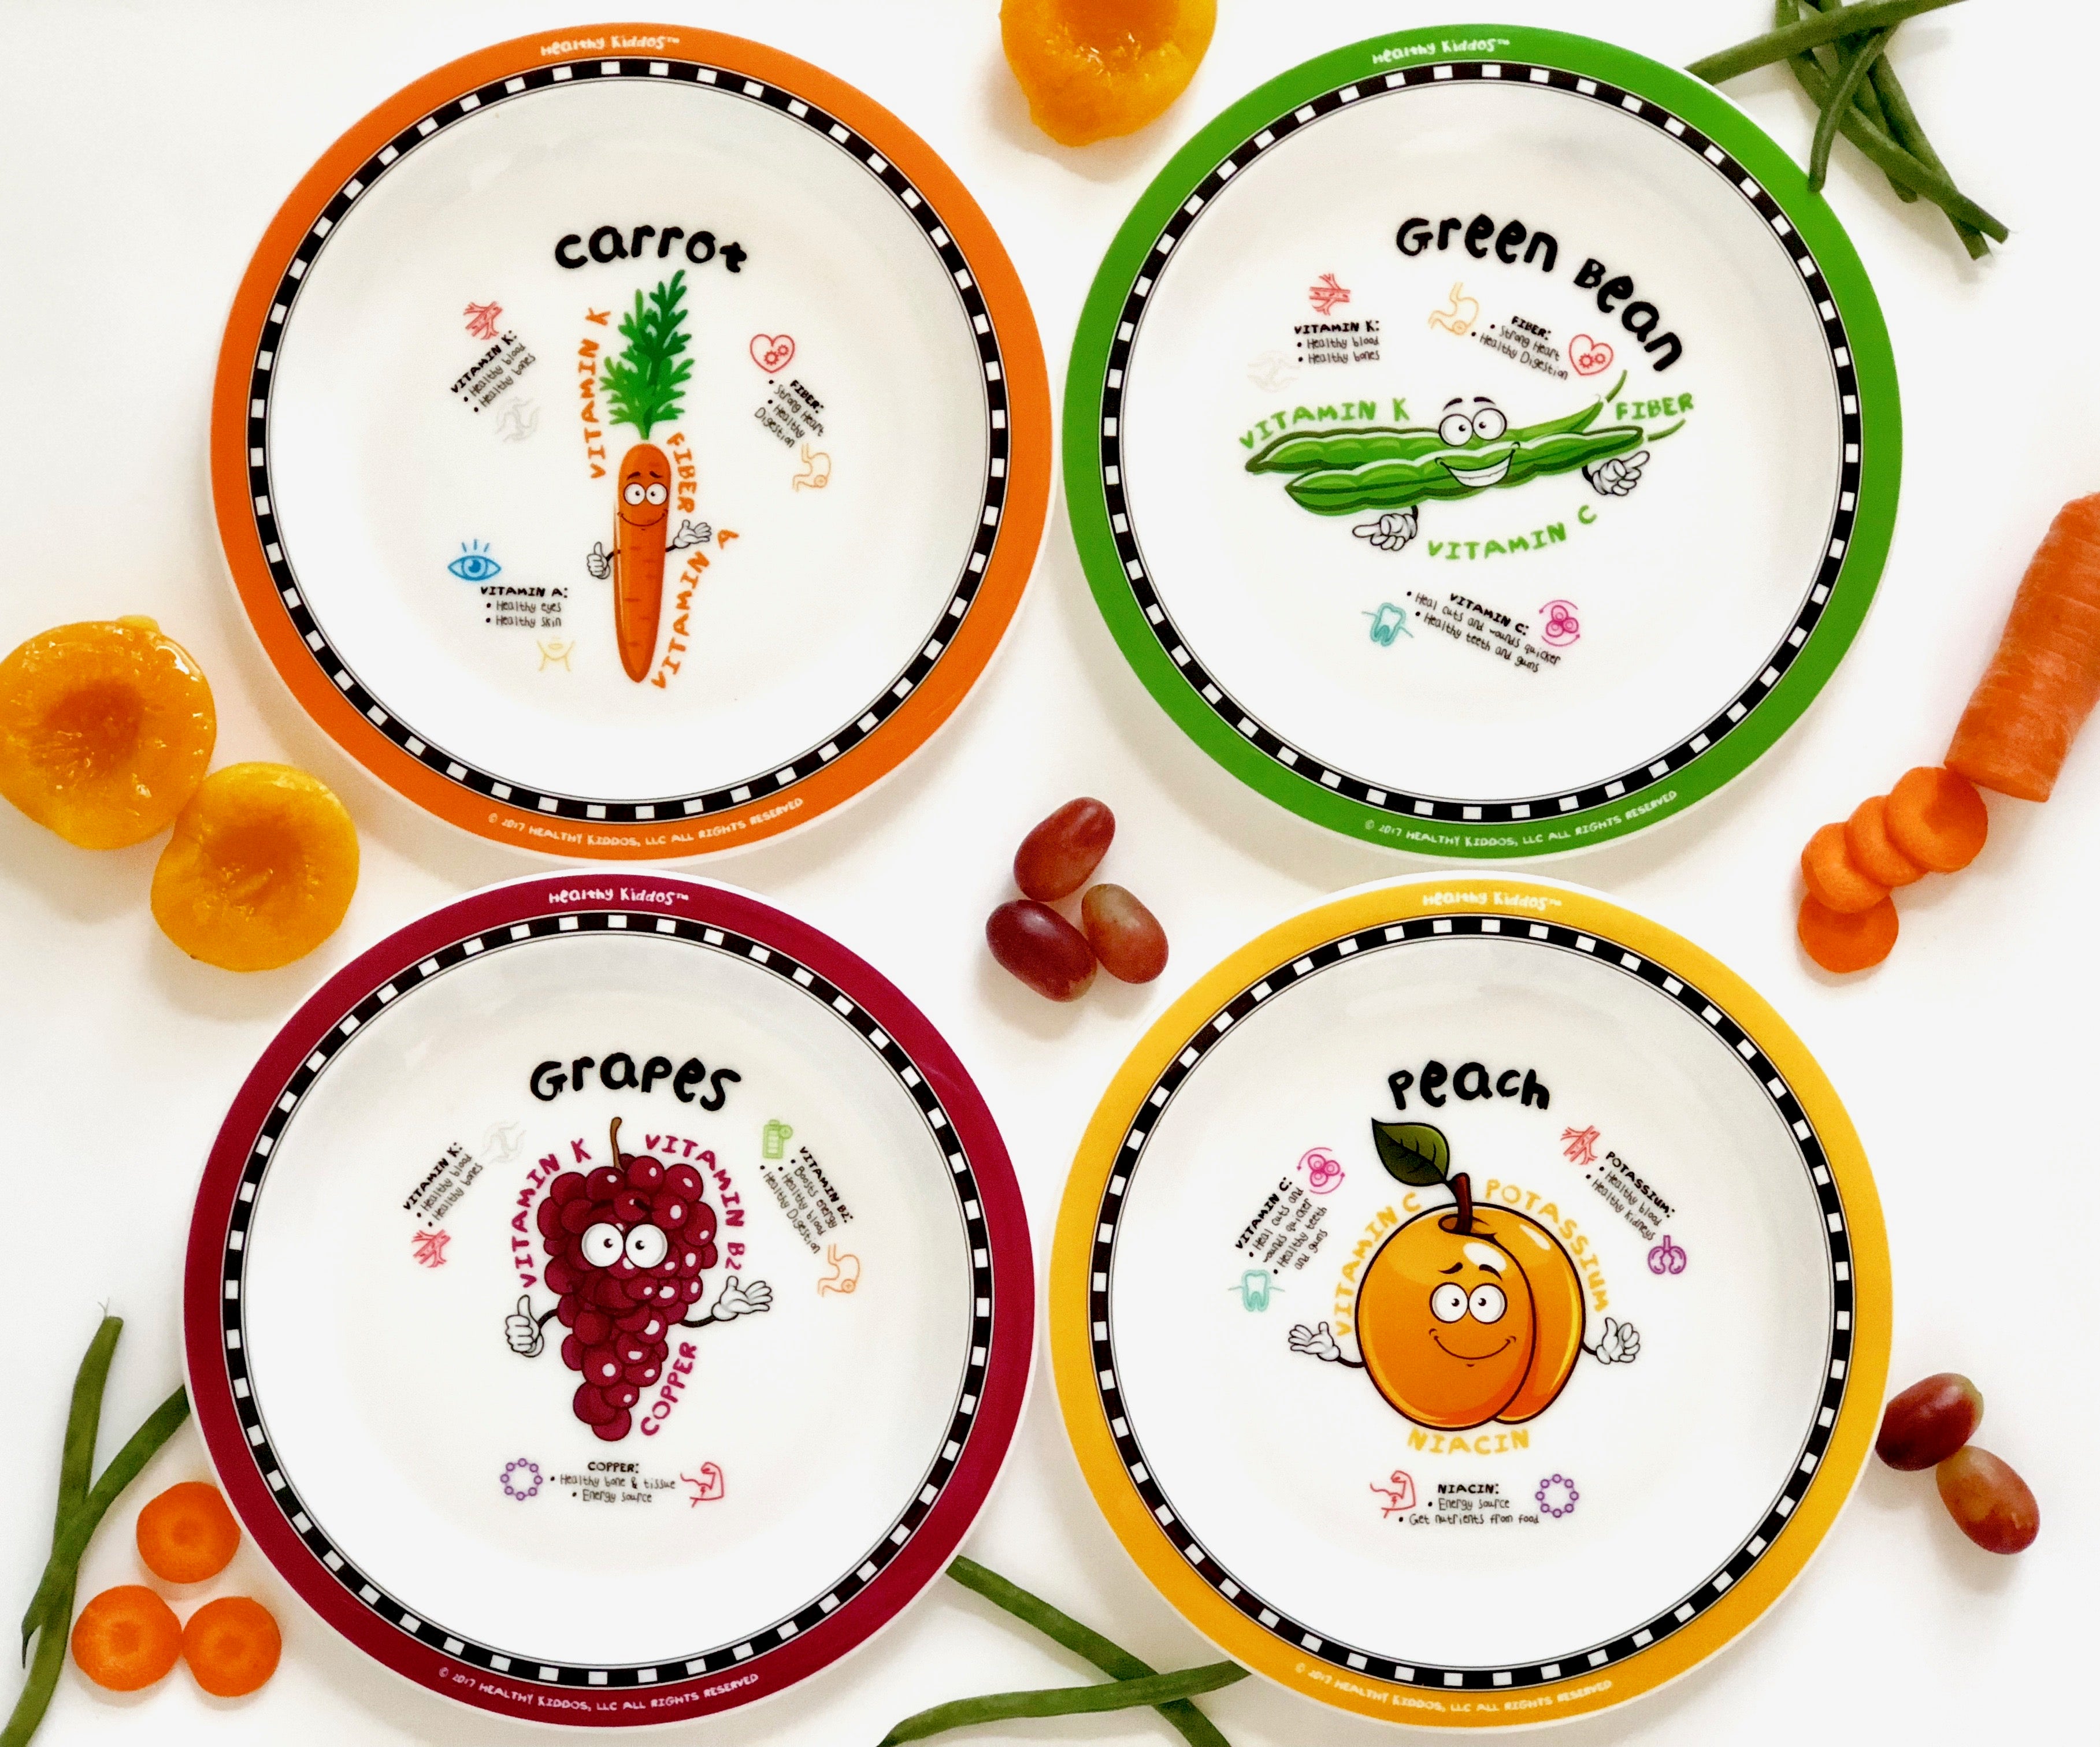 Healthy Kids Plates set 1 - carrot, great bean, grapes, and peach